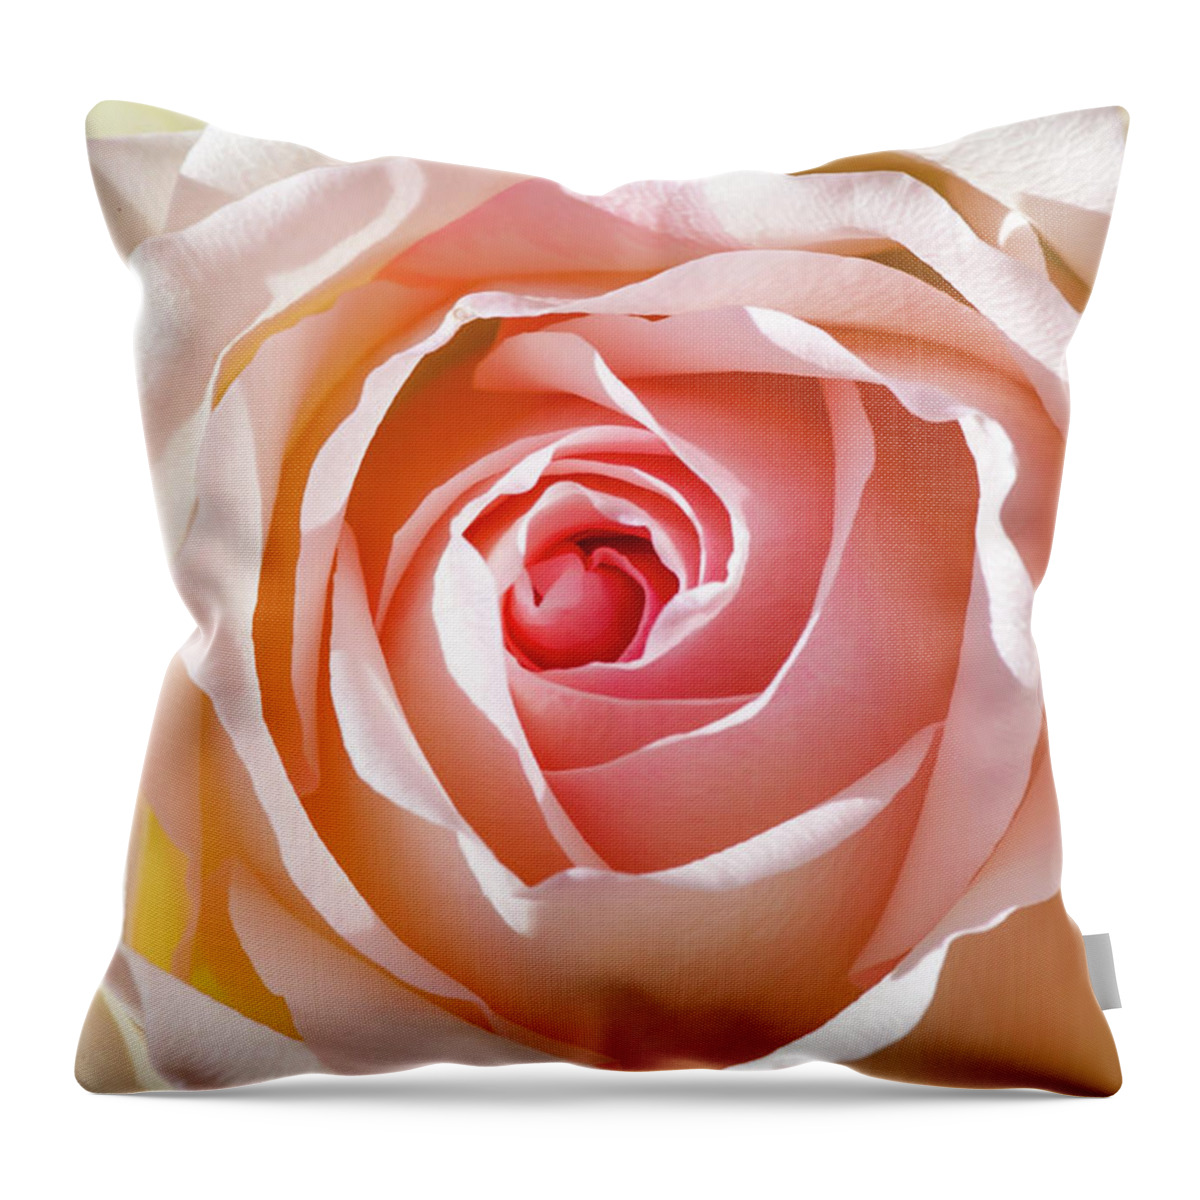 Pink Rose Throw Pillow featuring the photograph Soft As A Rose by Az Jackson